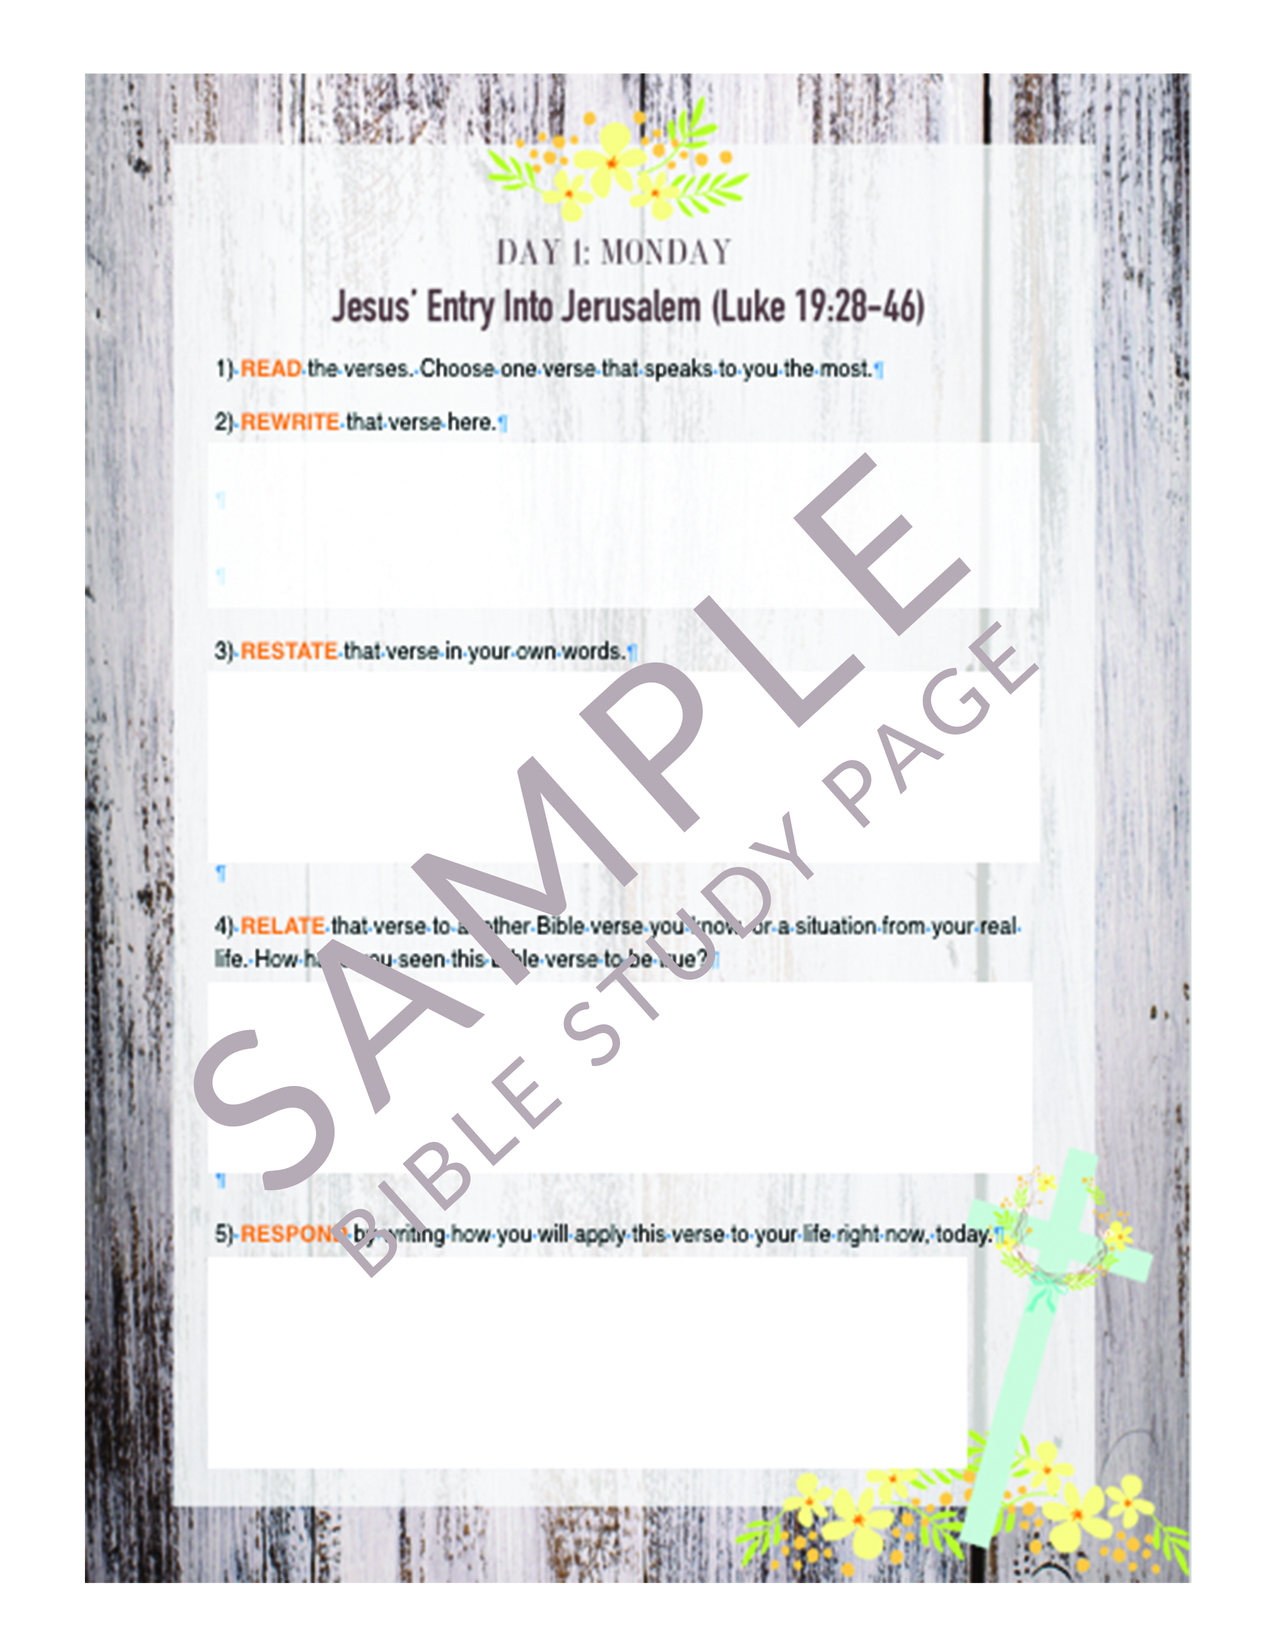 easter bible study | easter bible study lessons printable | easter bible study youth | easter bible study lessons | easter bible studies